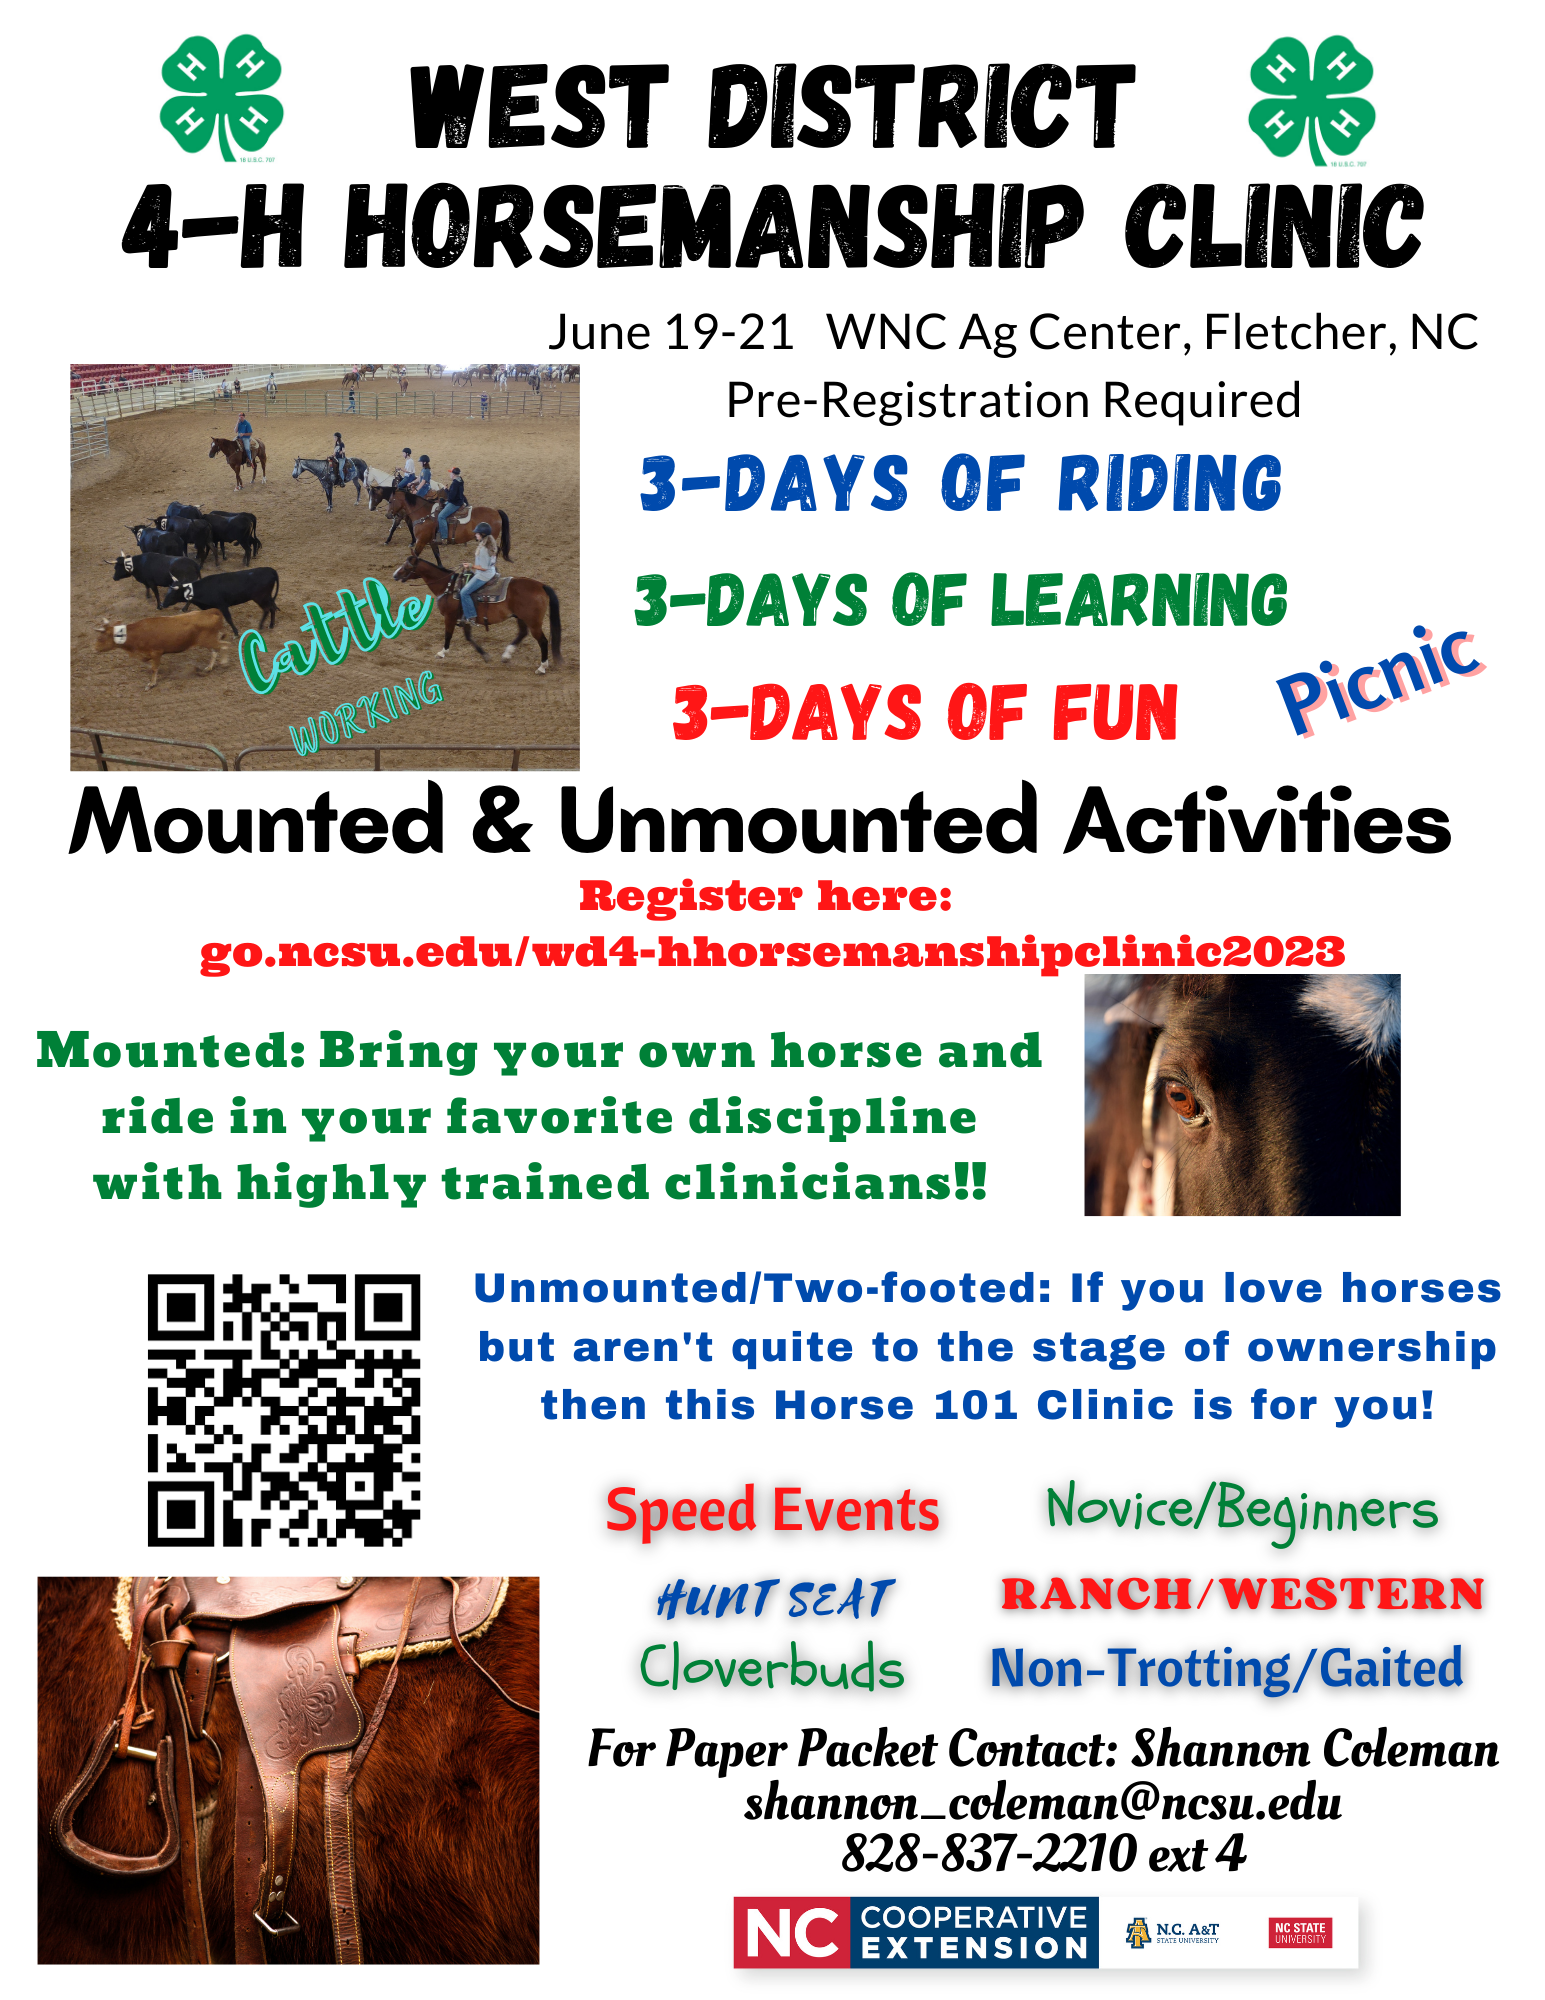 West District 4-H Horsemanship Clinic. June 19-21 WNC Ag Center, Fletcher, NC Pre-Registration Required. 3-Days of Riding, 3-Days of Learning, 3-Days of Fun. Mounted & Unmounted Activities. Mounted: Bring your own horse and ride in your favorite discipline with highly trained clinicians! Unmounted/Two-footed: If you love horses but aren't quite to the stage of ownership then this Horse 101 clinic is for you!